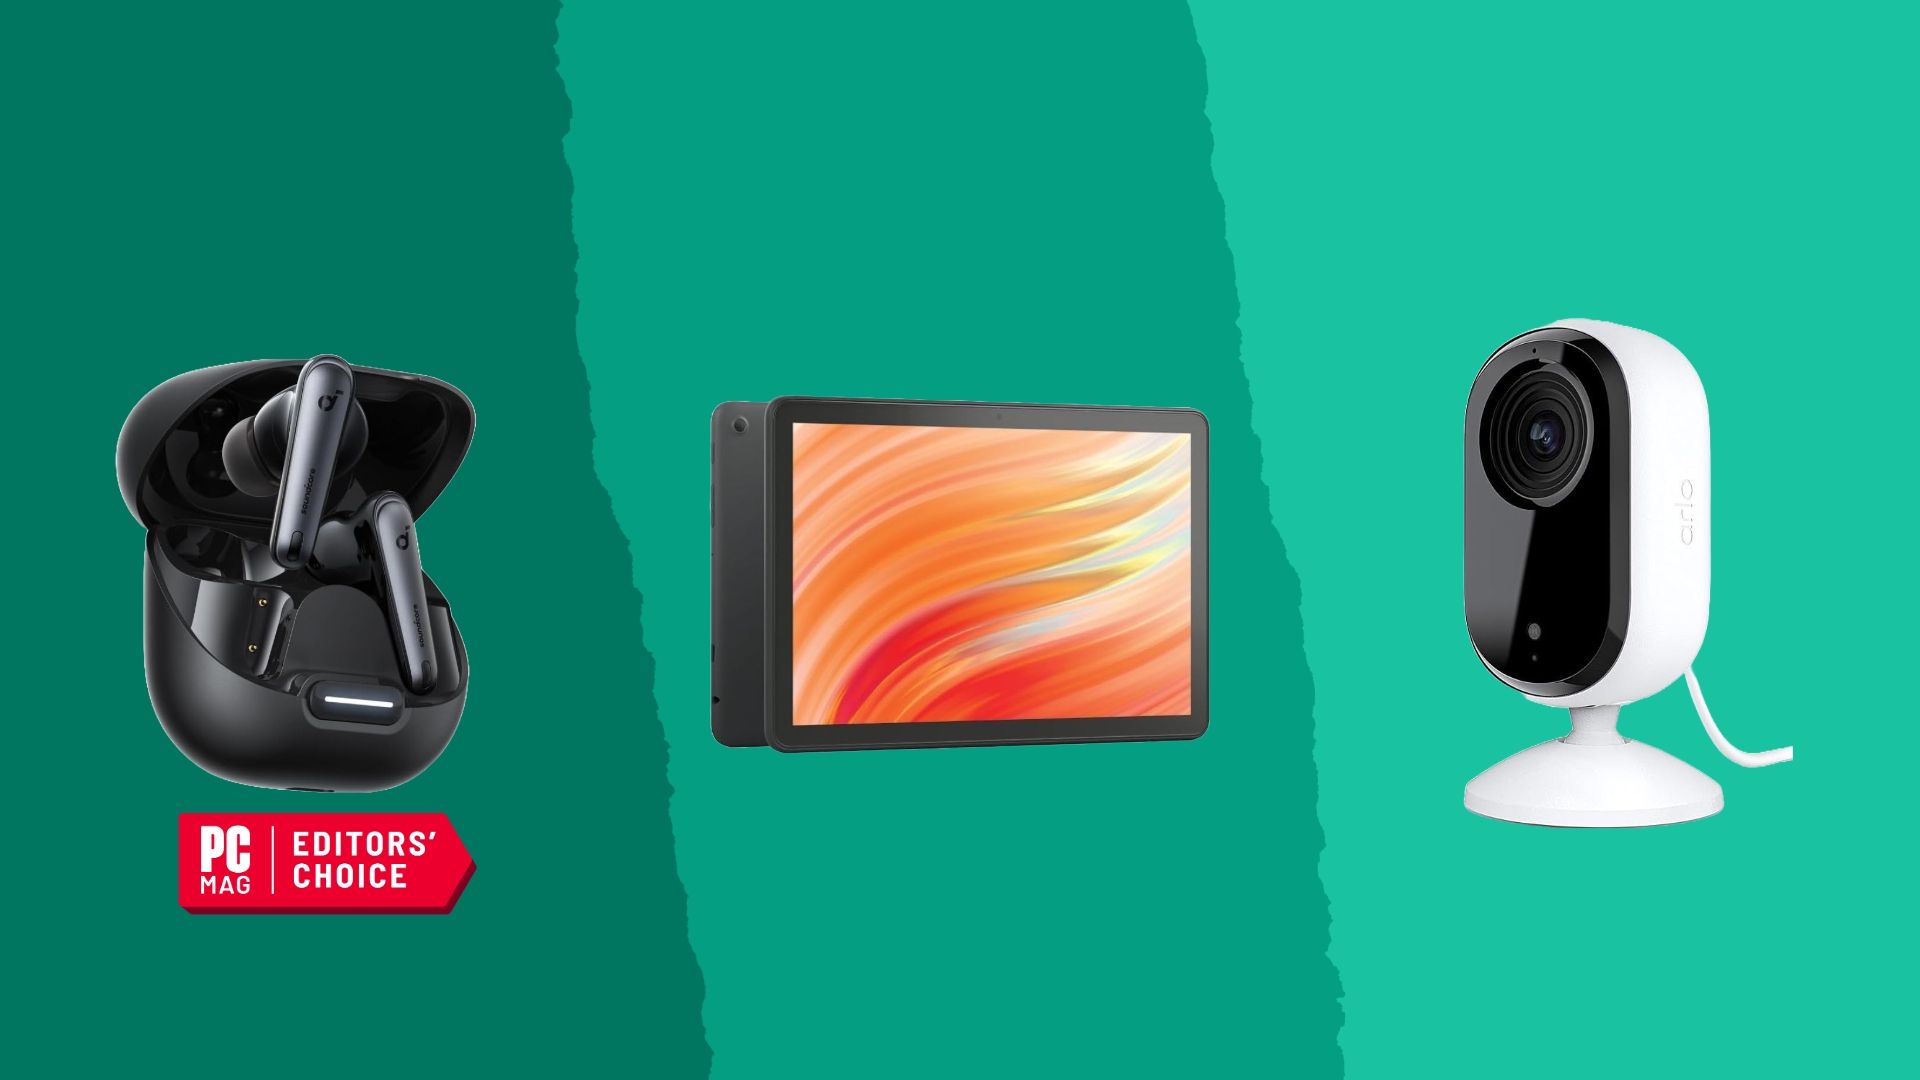 Triptych of gadgets on colorful background